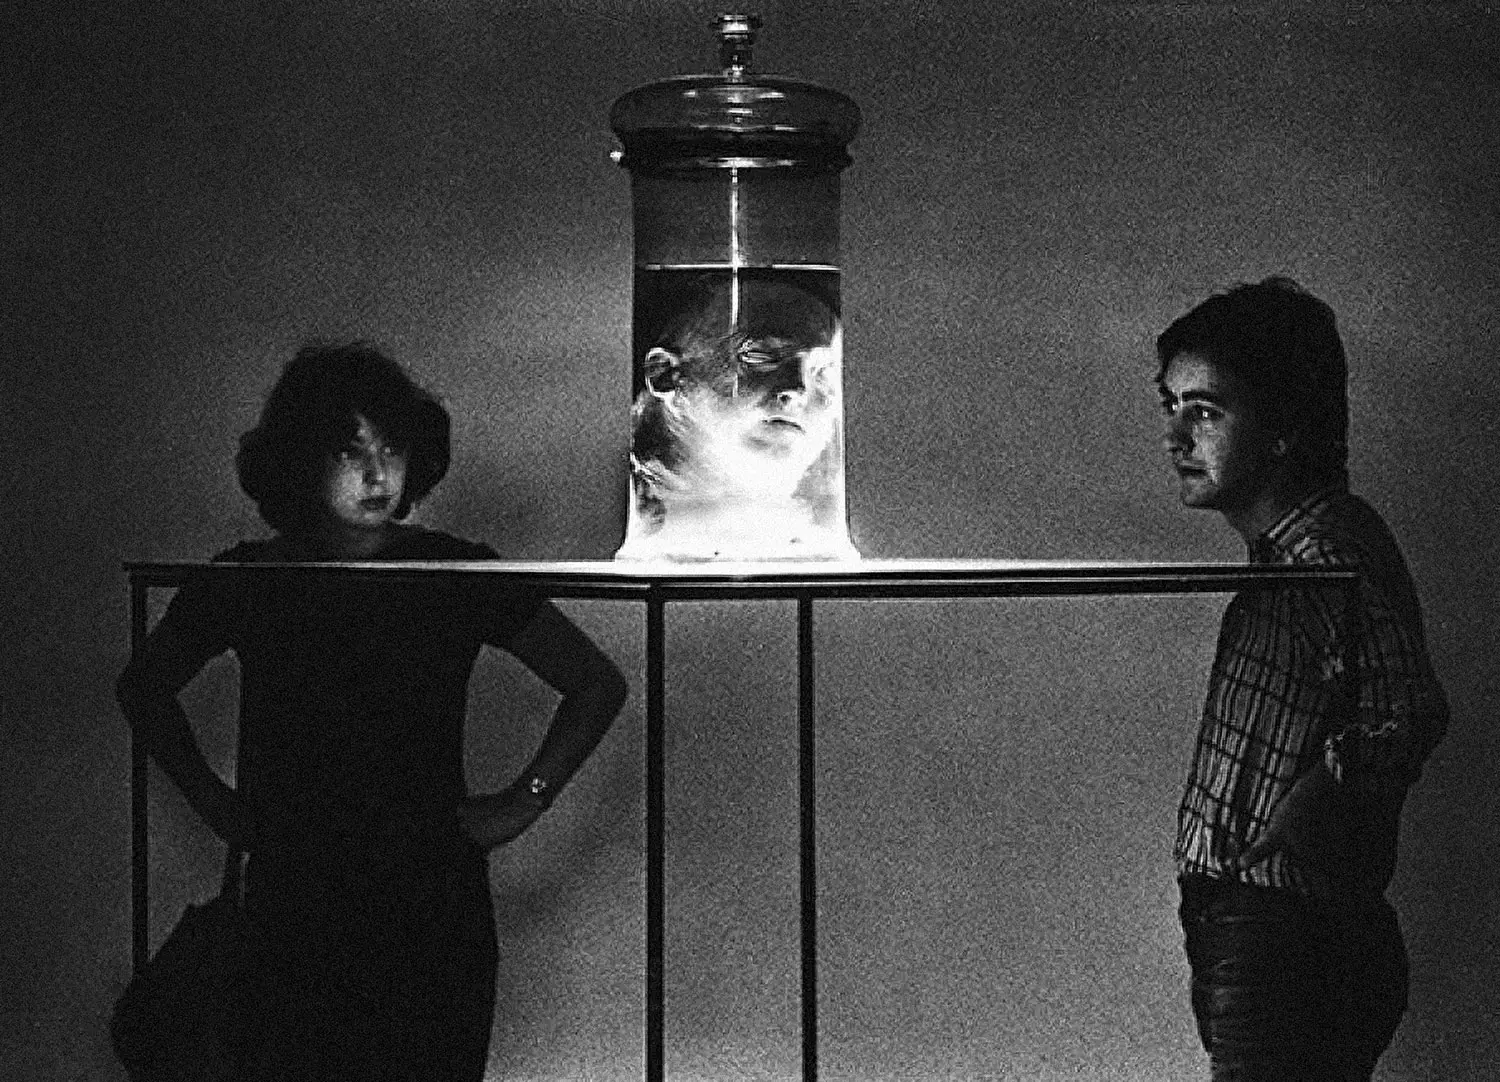 Lombroso’s preserved head is suspended in a jar that’s illuminated from below. A couple inquisitively stares at it. 